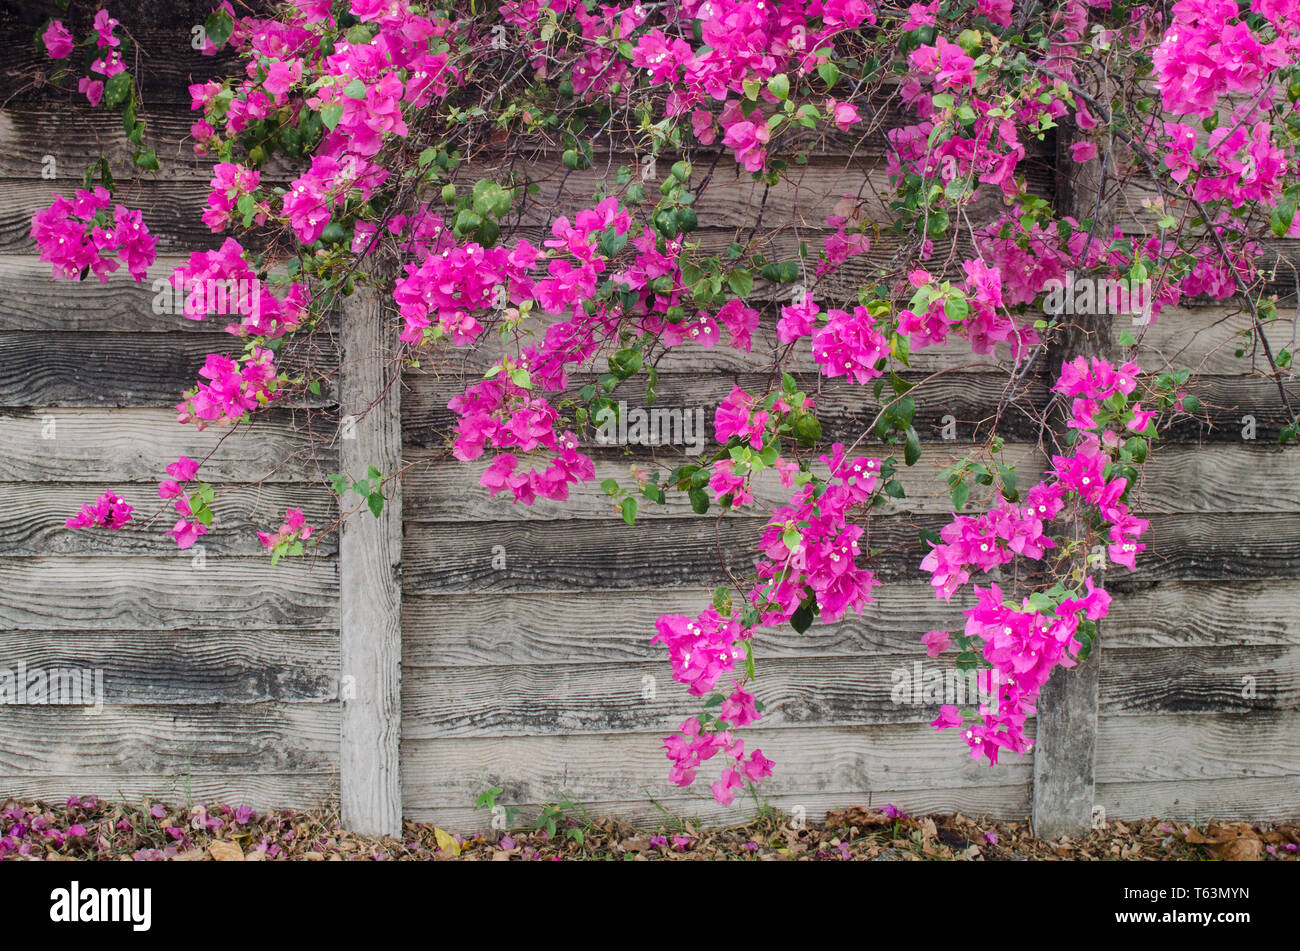 Fence with colorful pink bougainvillea flowers Stock Photo